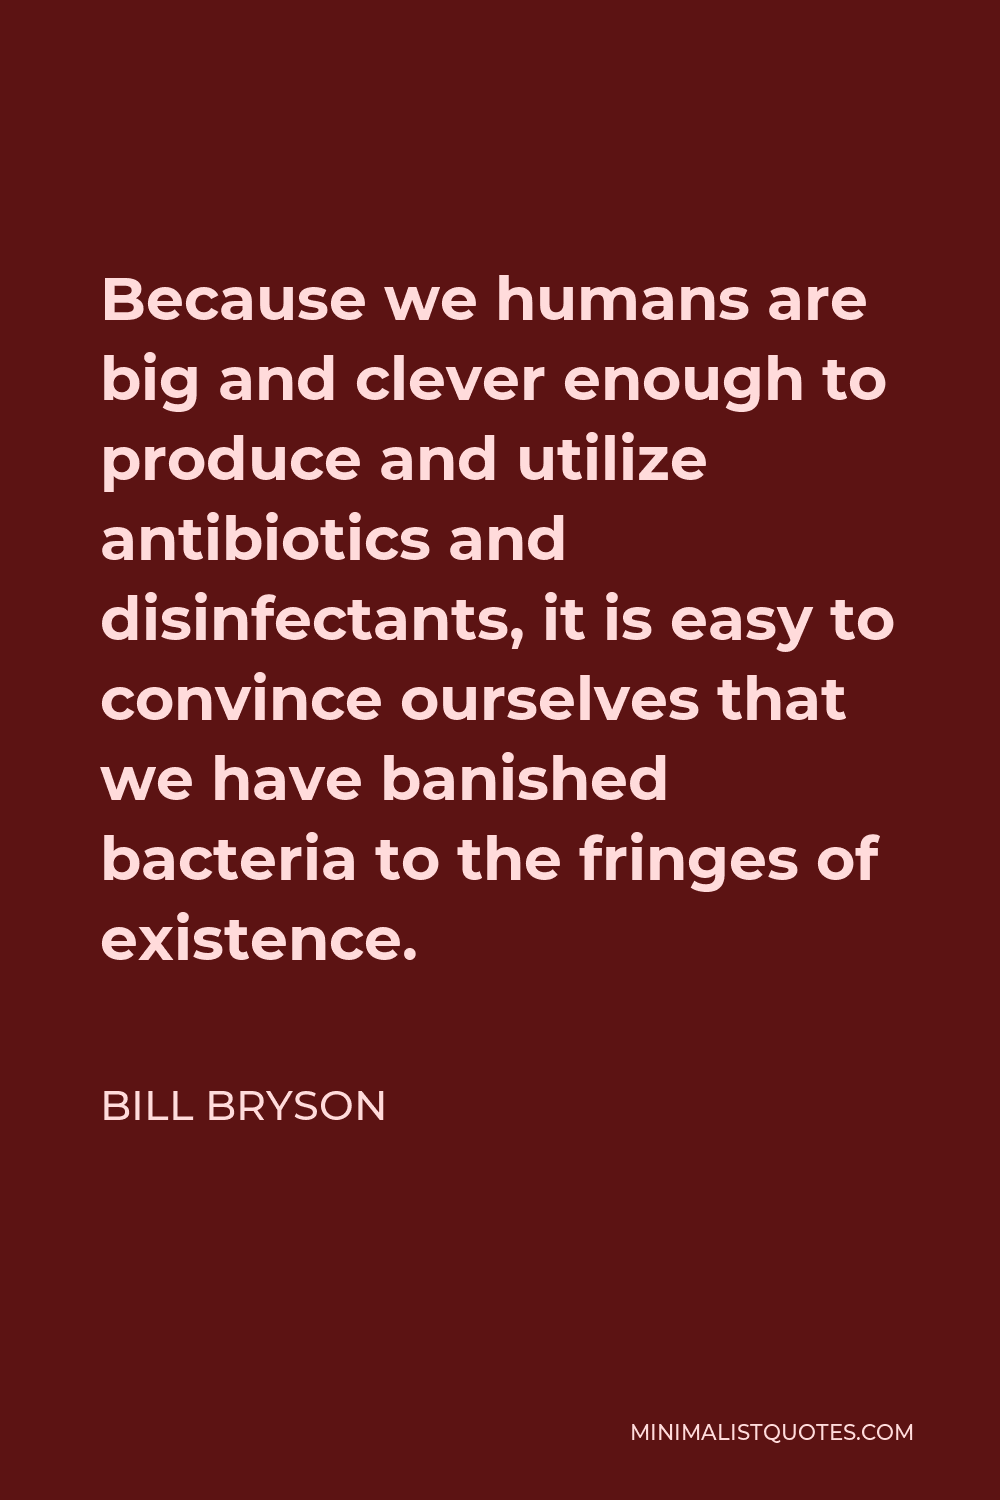 Bill Bryson Quote - Because we humans are big and clever enough to produce and utilize antibiotics and disinfectants, it is easy to convince ourselves that we have banished bacteria to the fringes of existence.